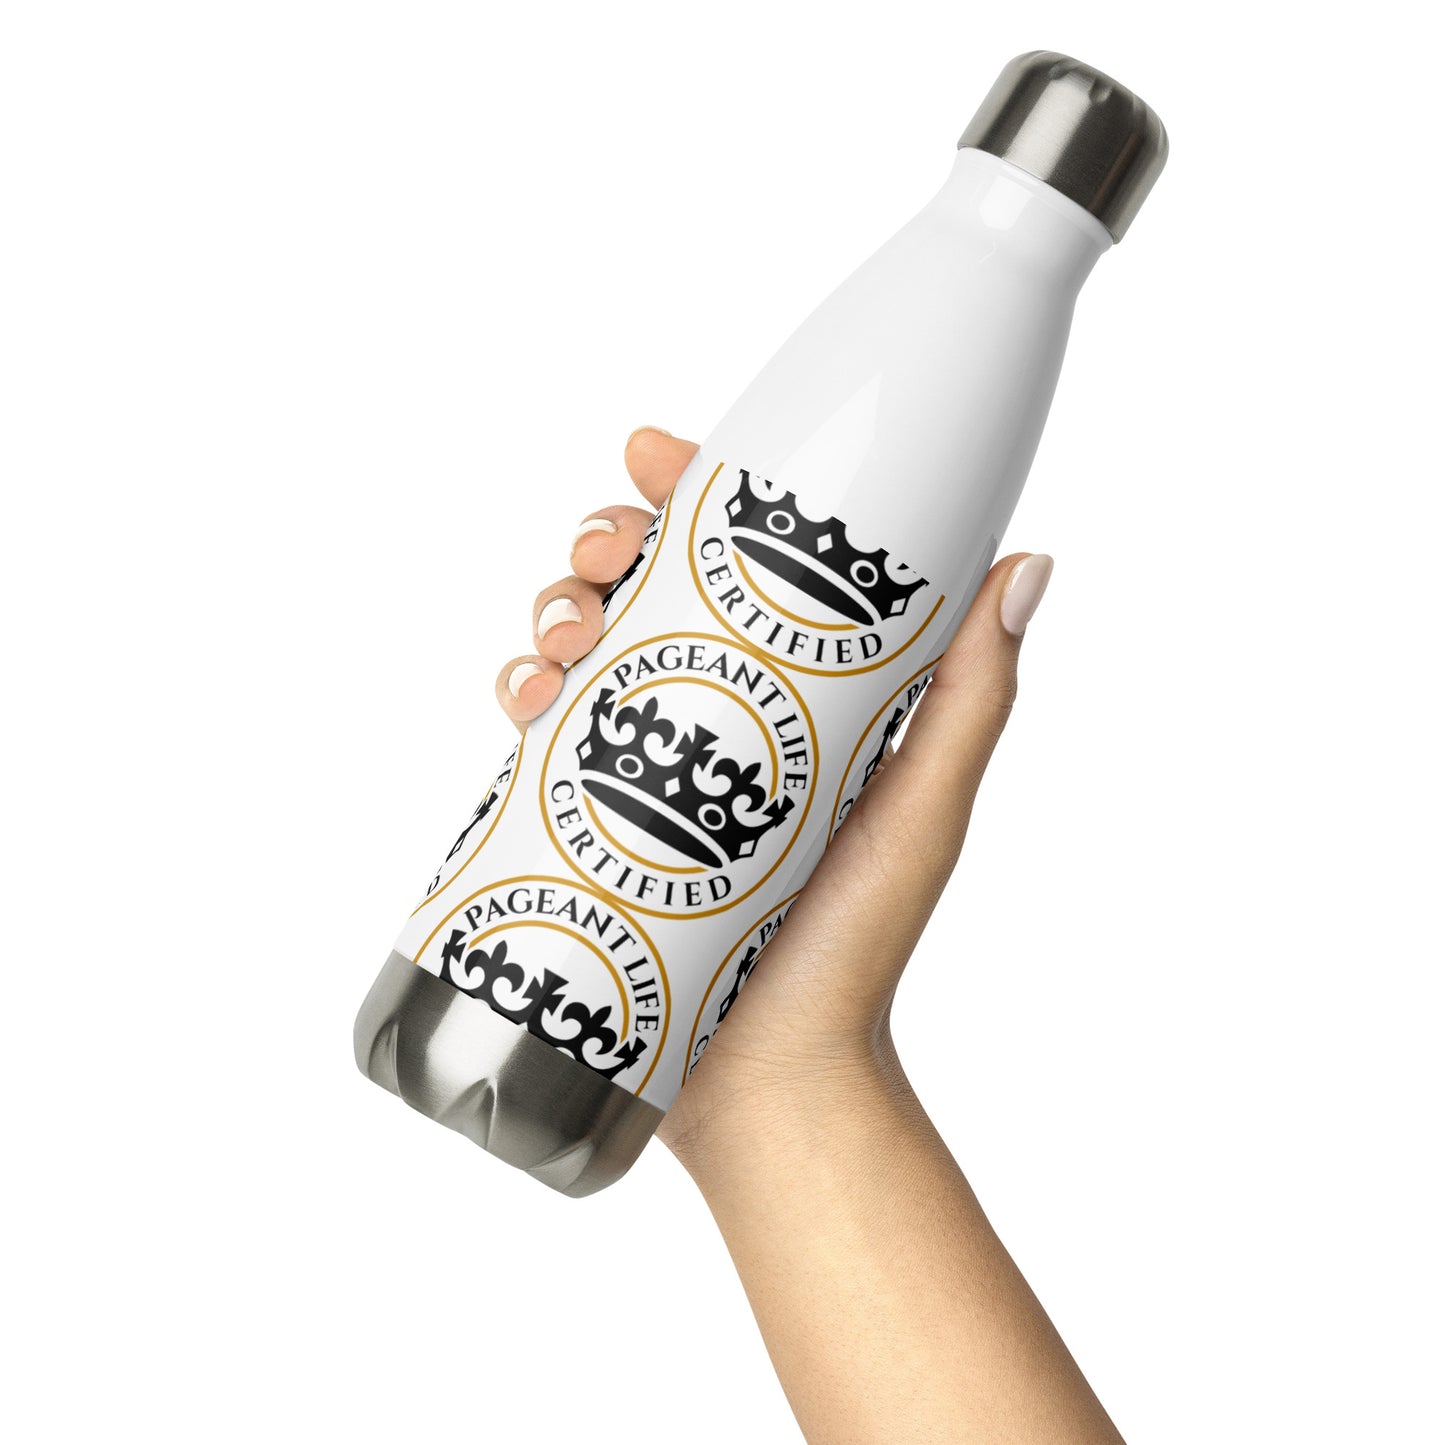 Black and Gold/ White Pageant Life Certified Stainless Steel Water Bottle